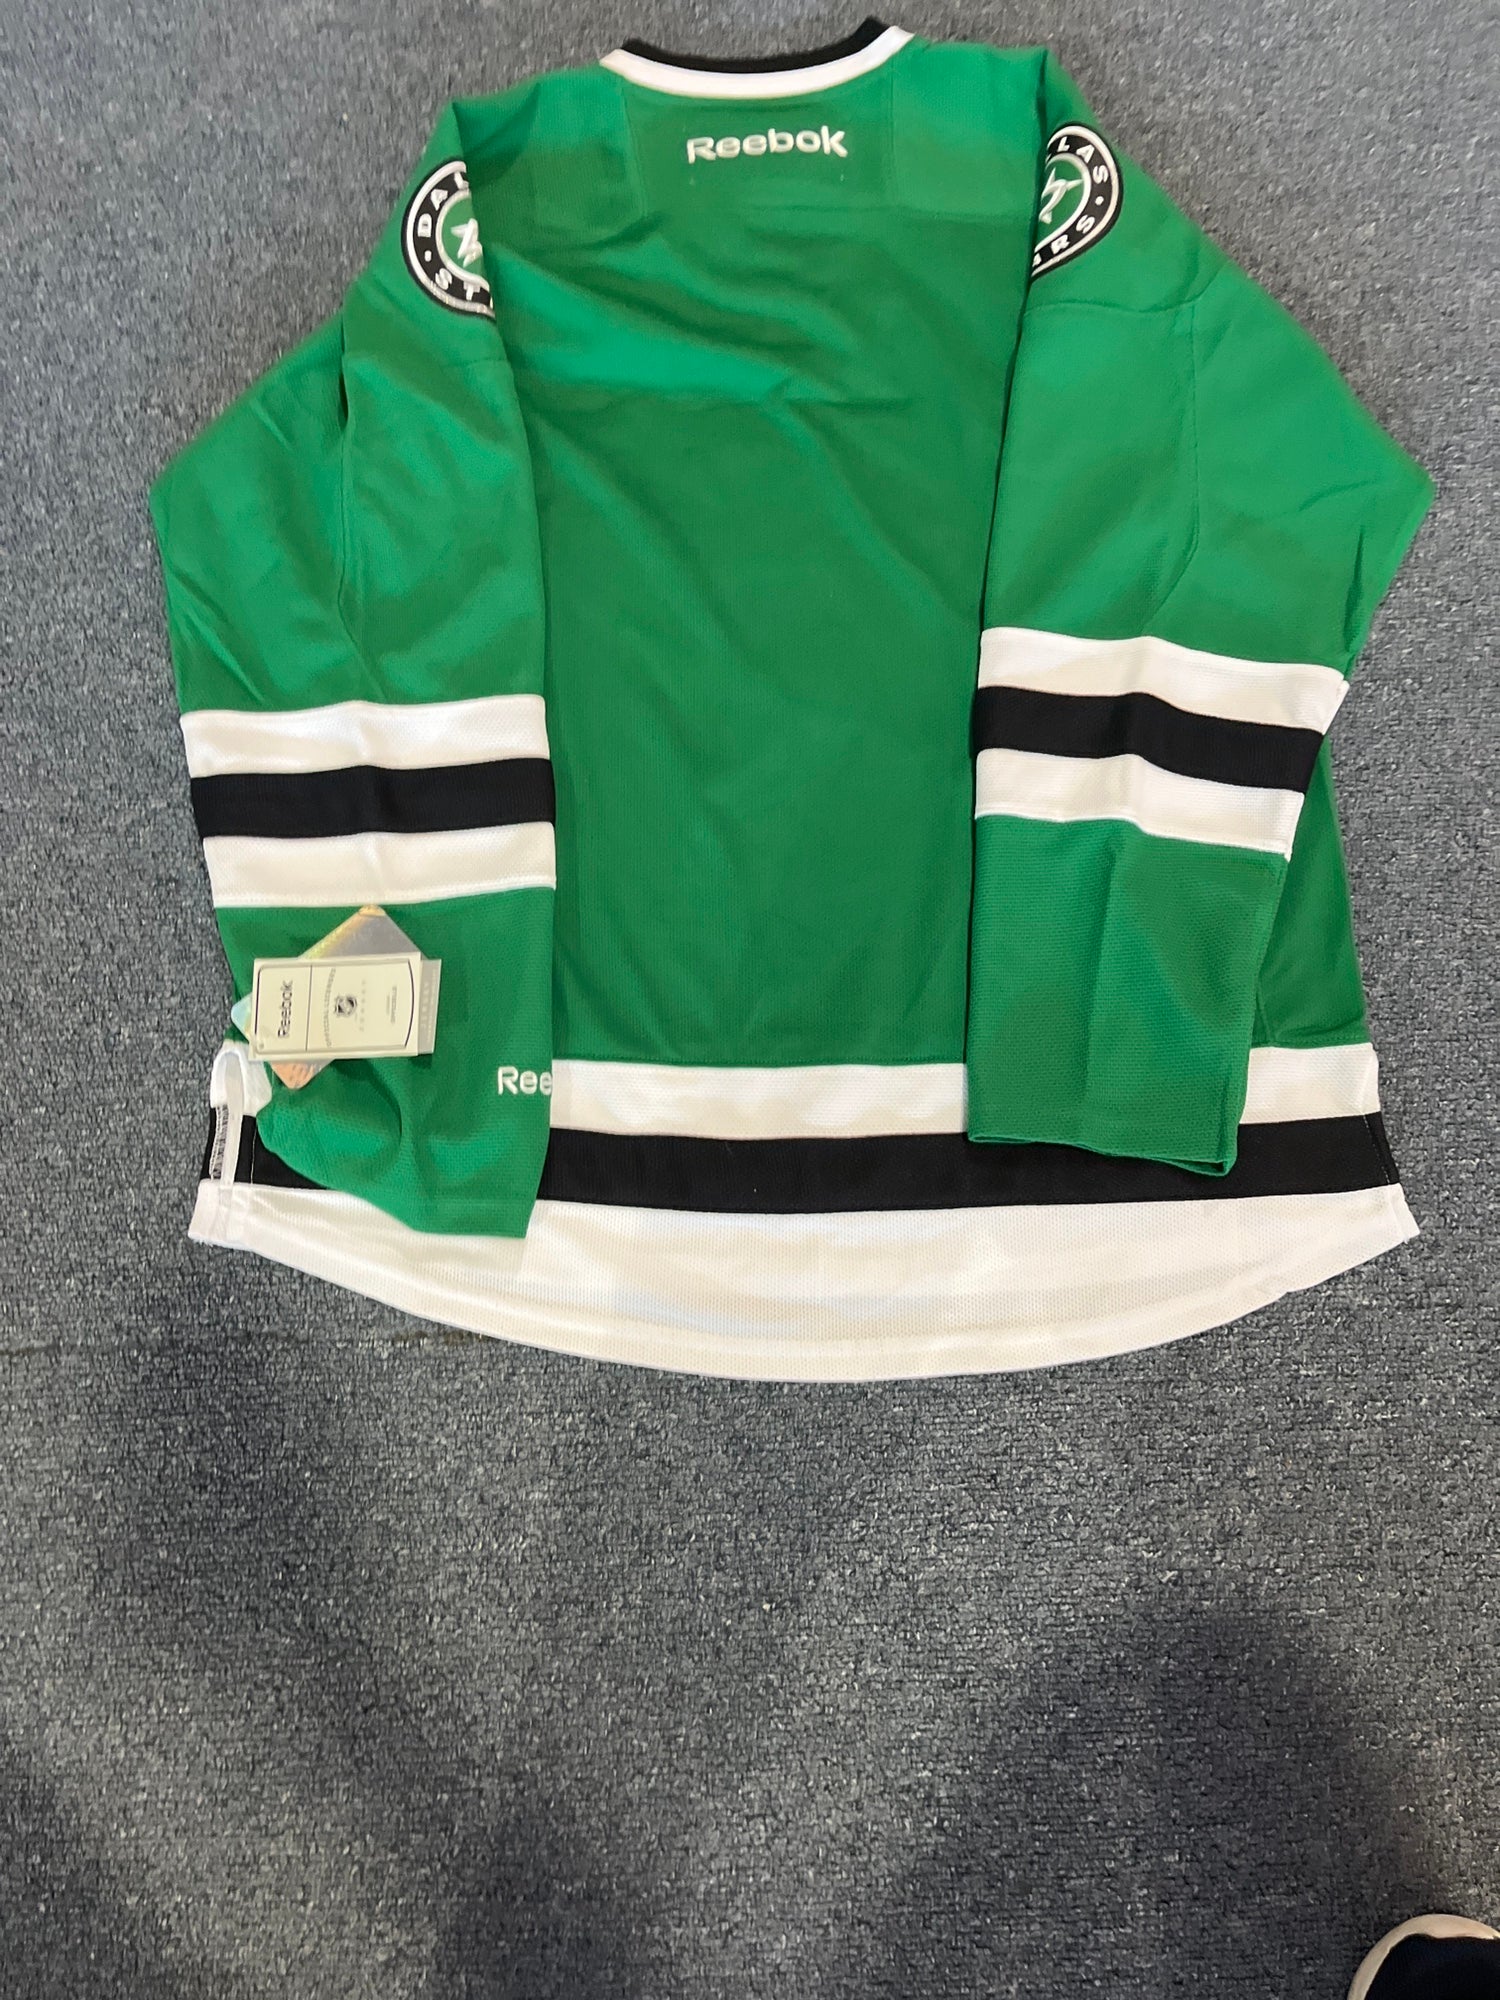 Autographed CCM Cote Dallas Stars Stanley Cup Hockey Jersey 2NHL Home Green  L